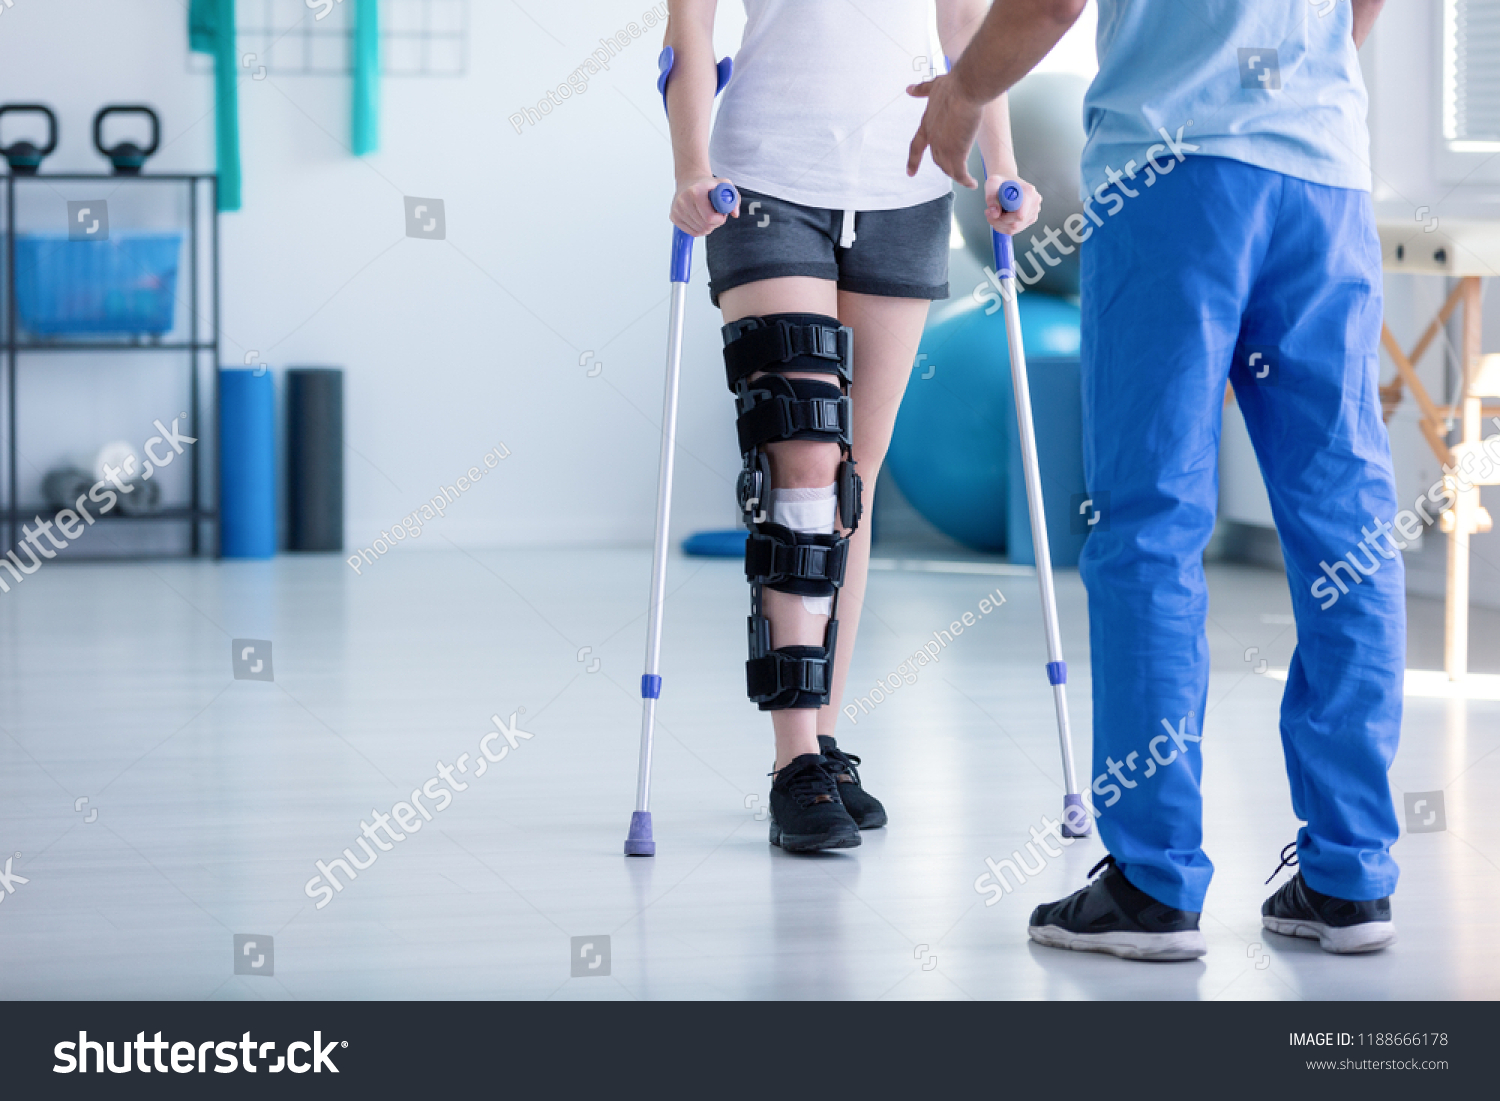 Professional physiotherapist supporting patient with orthopedic problem #1188666178